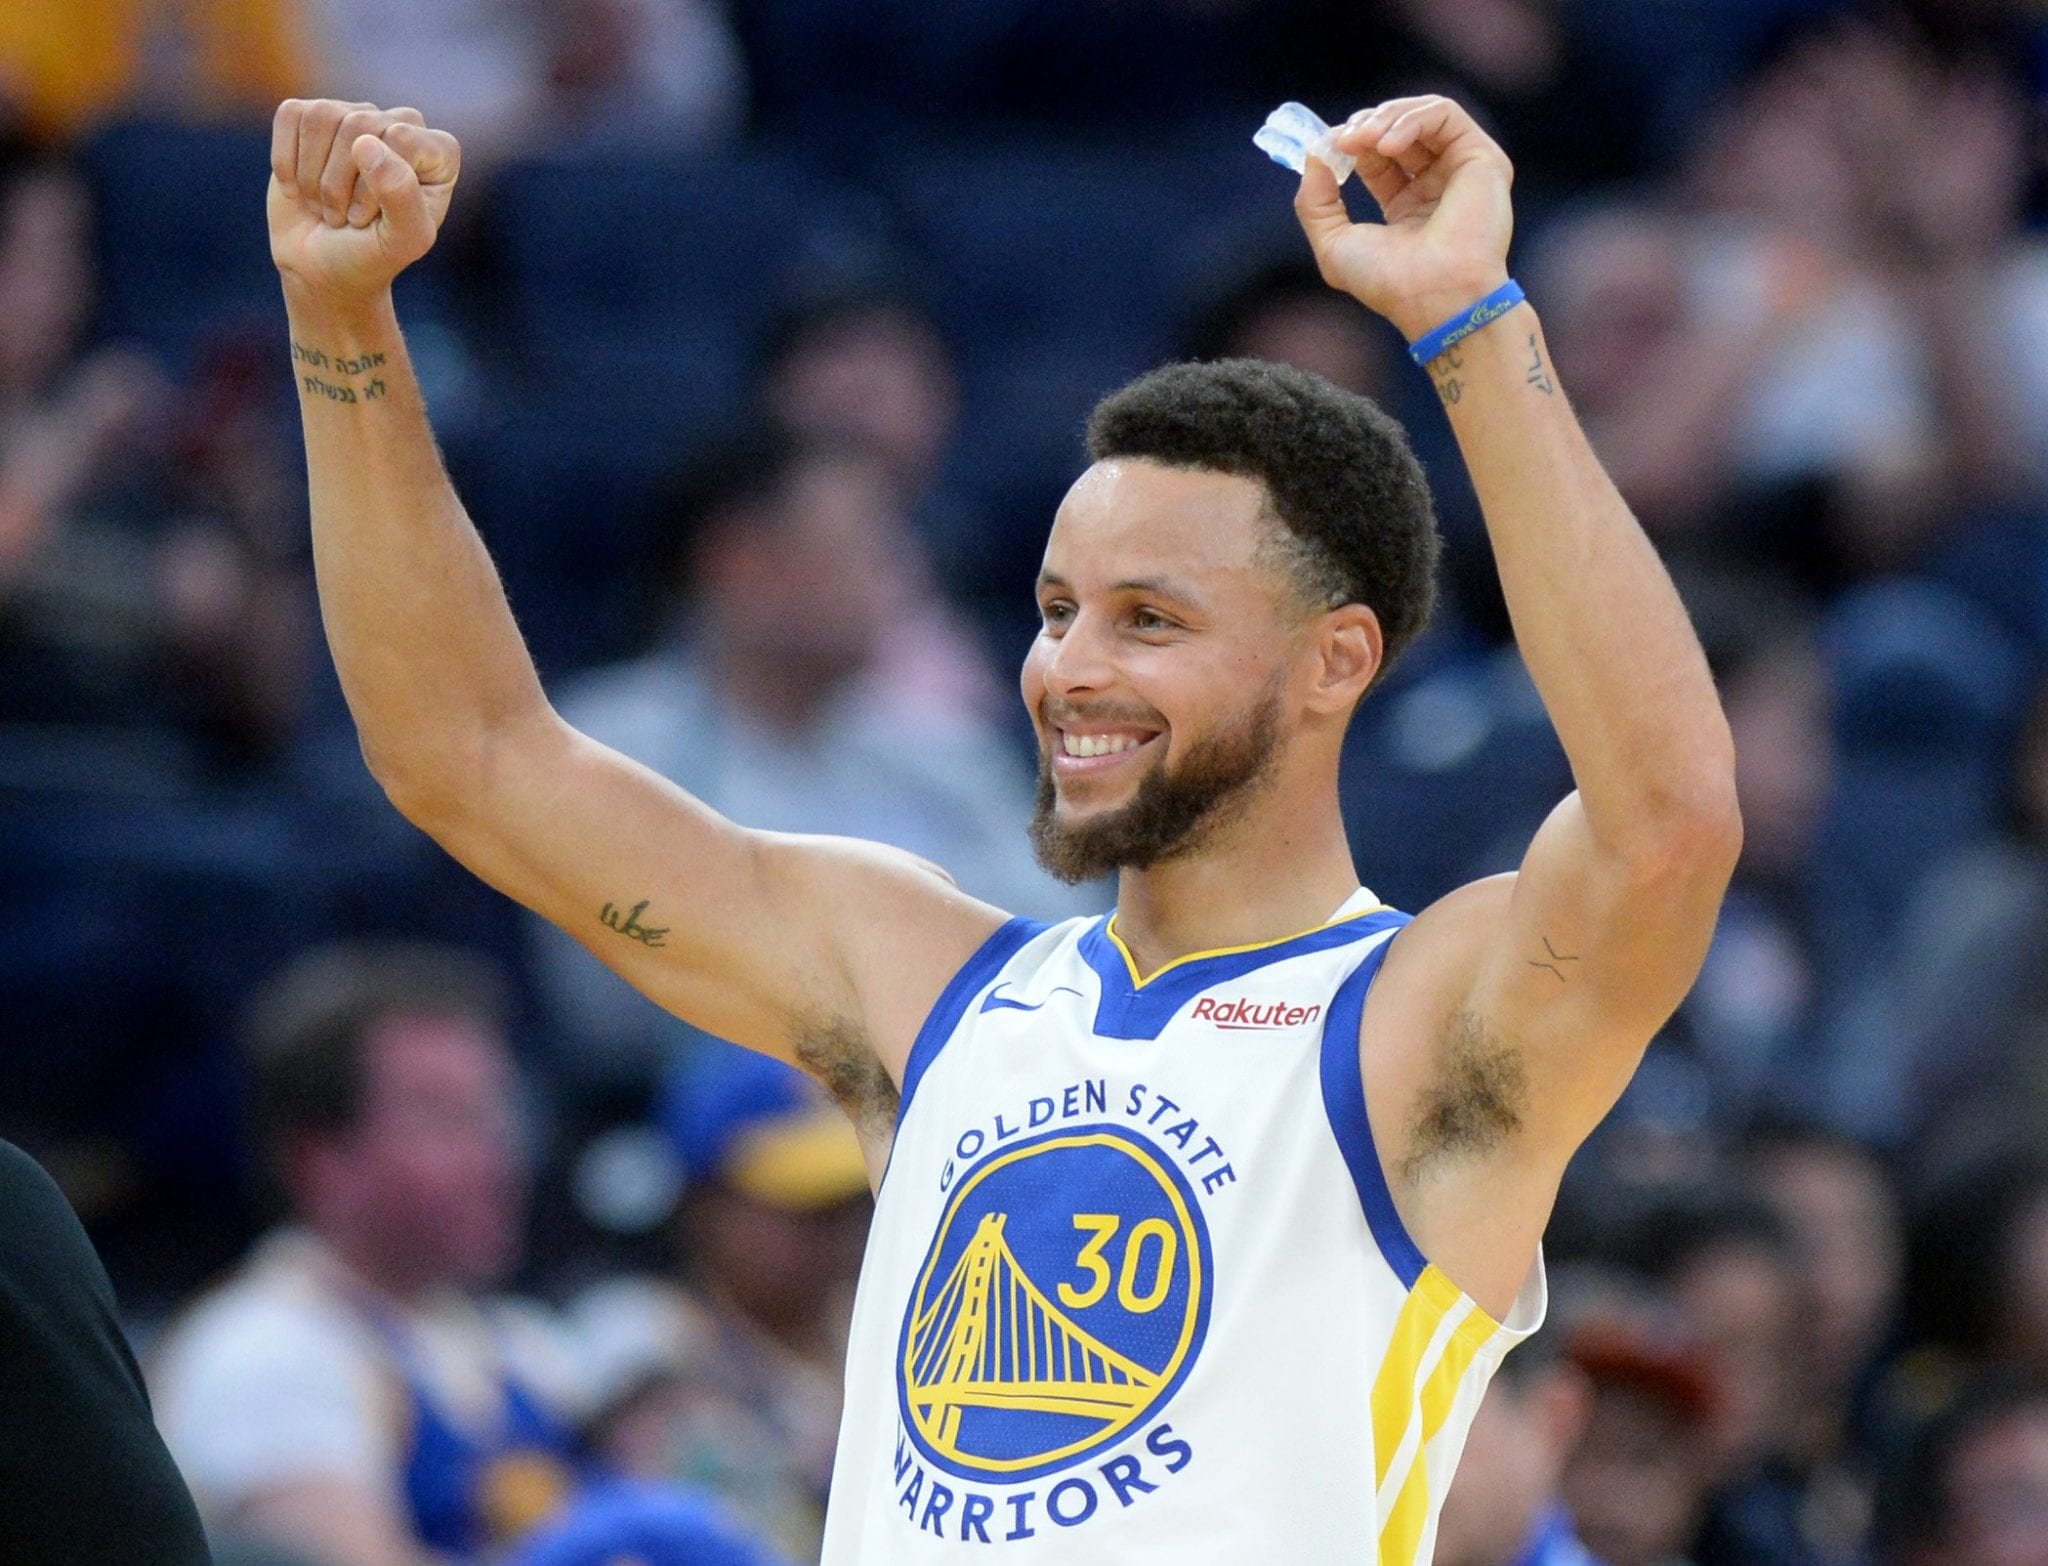 Golden State Warriors' Stephen Curry (30) celebrates the Warriors winning a challenge of a referees call in the second period of their NBA basketball game against the Minnesota Timberwolves at the Chase Center in San Francisco, Calif., on Thursday, Oct. 10, 2019. (Doug Duran/Bay Area News Group)